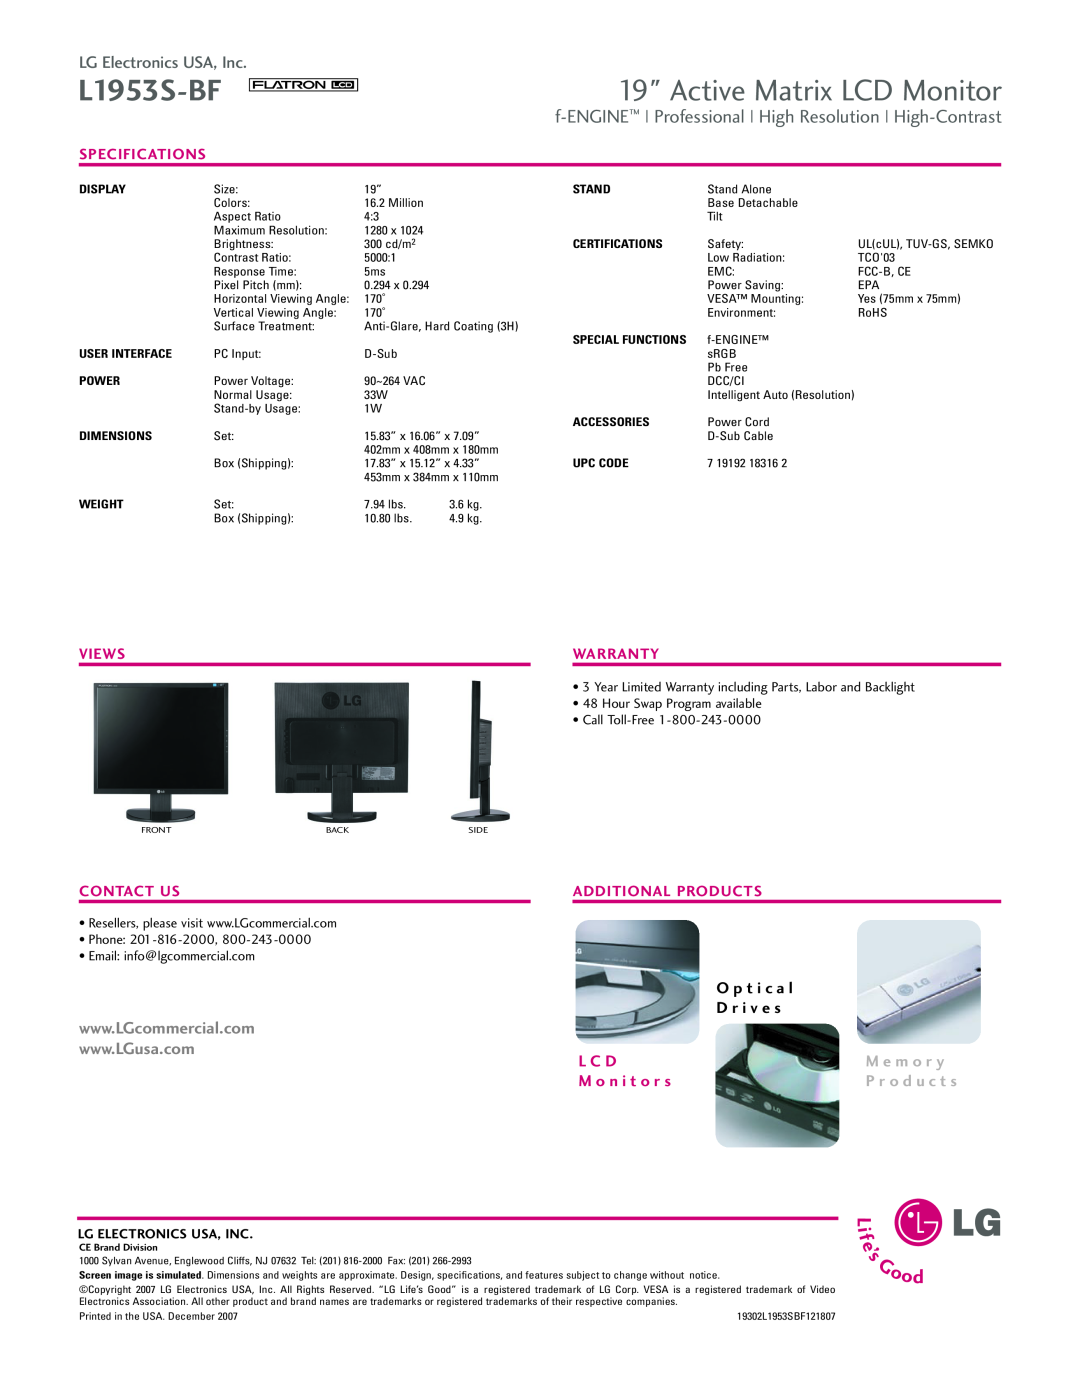 LG Electronics L1953S-BF Active Matrix LCD Monitor, f-ENGINE Professional High Resolution High-Contrast, L C D, Views 